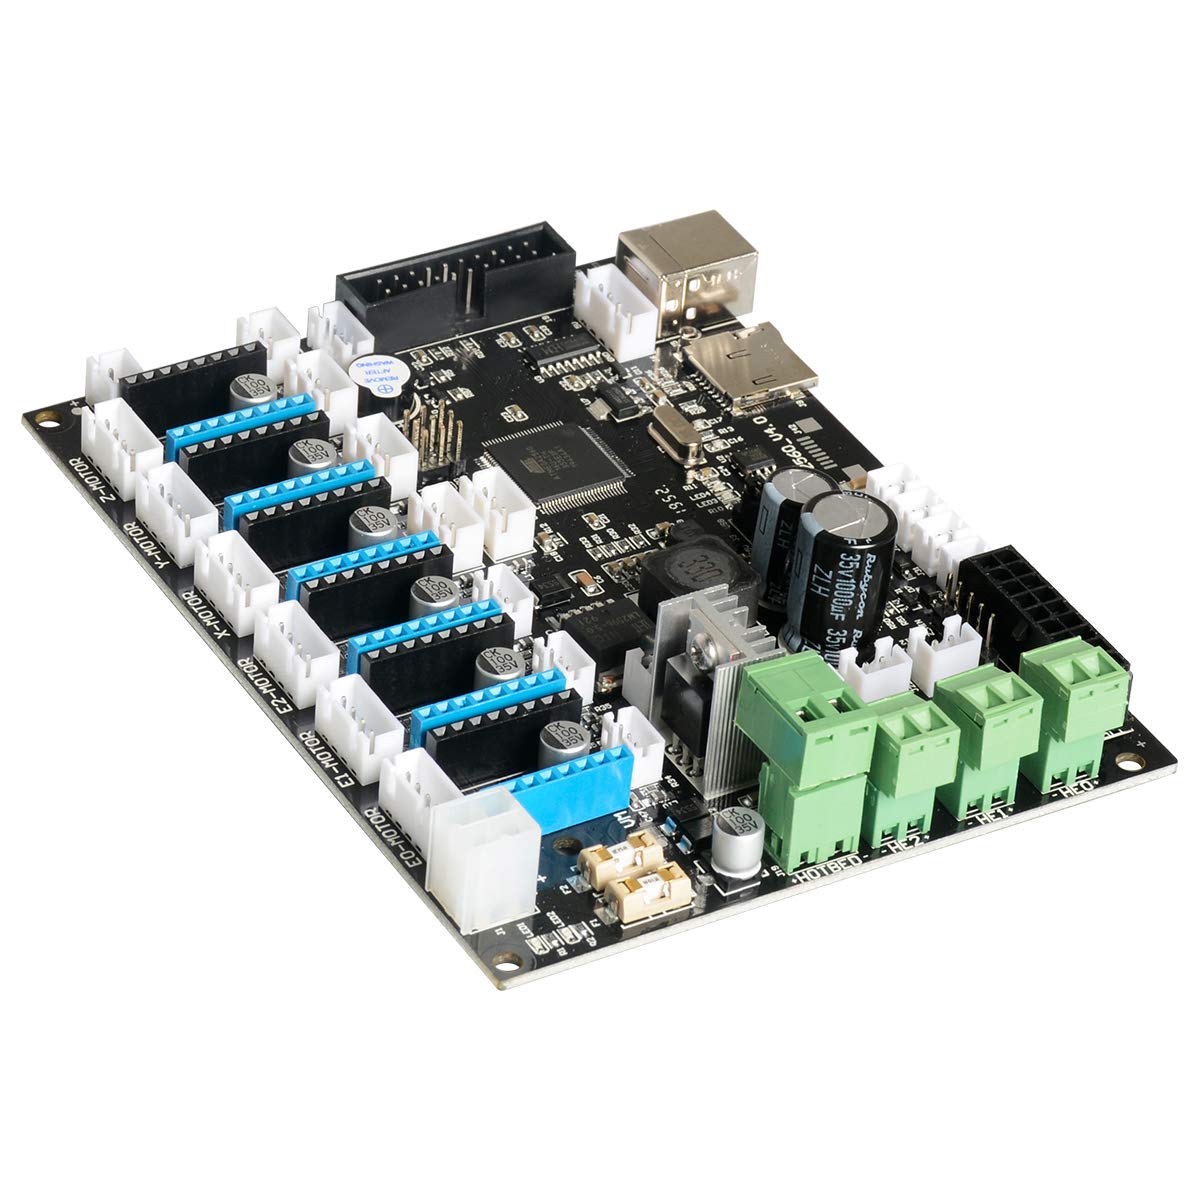 GIANTARM Geeetech GT2560_V4.0 Control Board for A20M V4.0 Version 3D